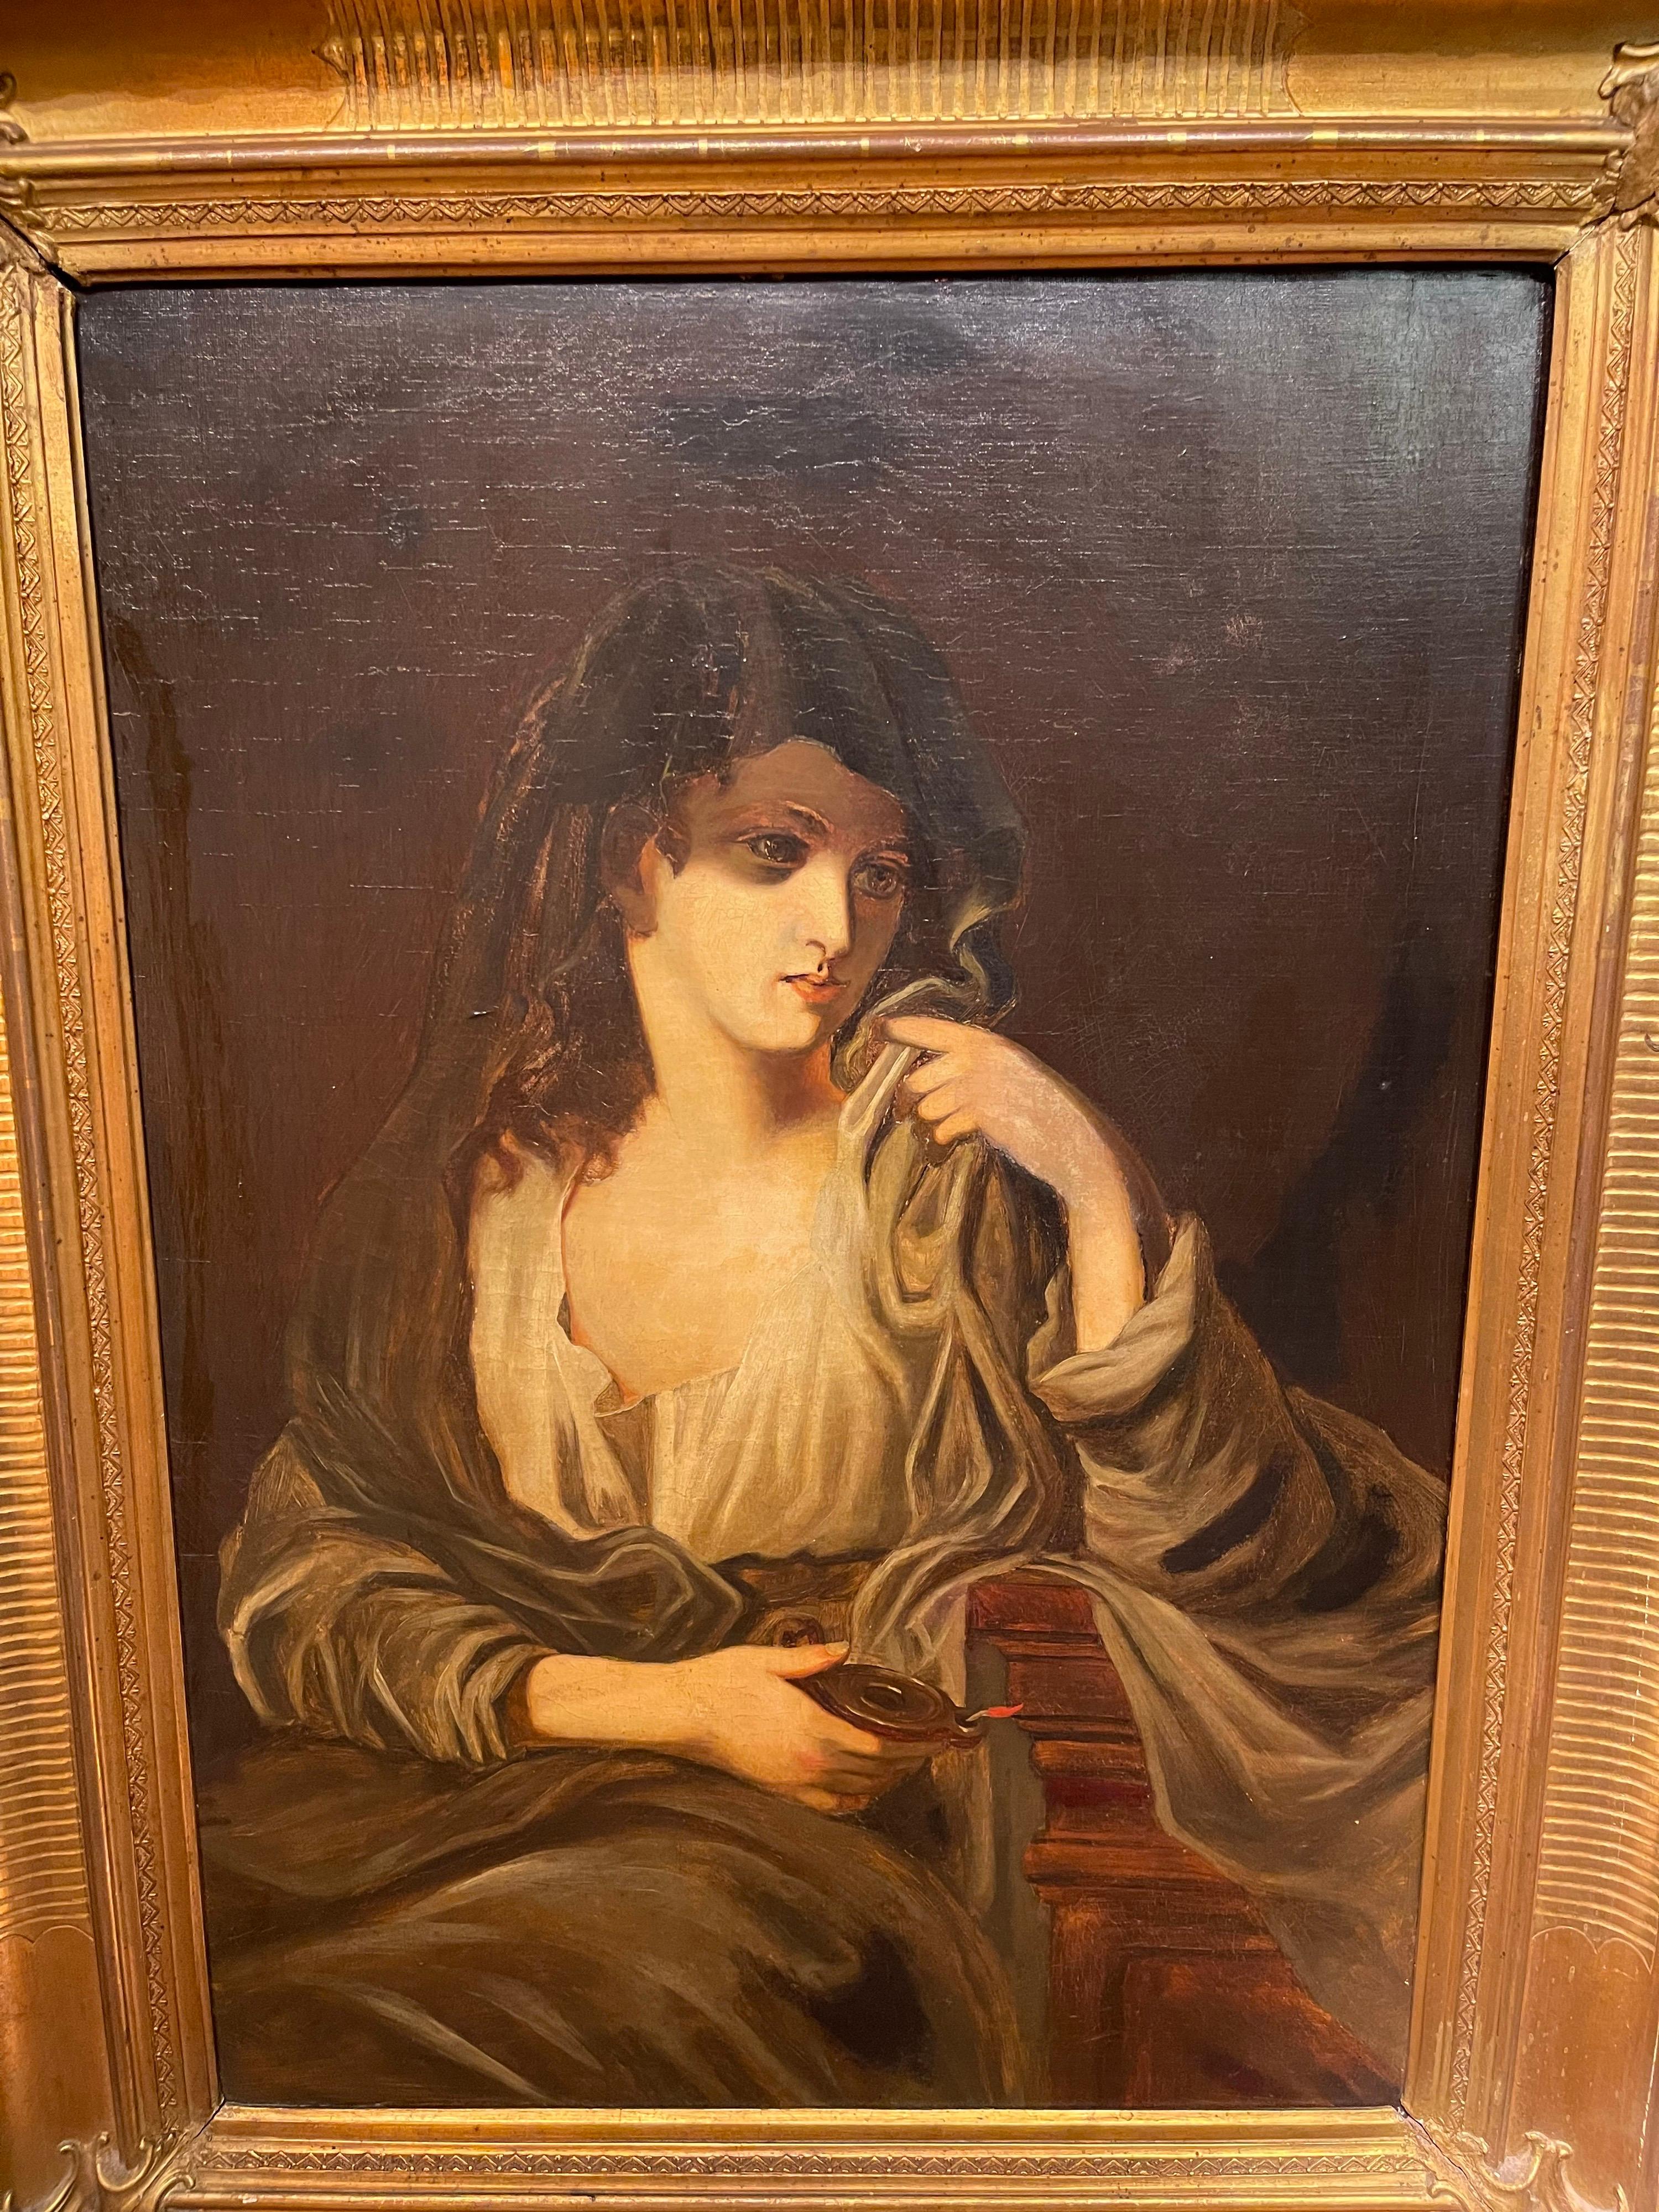 Monumental oil on canvas painting / portrait, 19th century

High quality oil painting from the 19th century. Wide gold frame. Illustration of a veiled woman in a thoughtful pose. Impressively painted paintings. Unsigned work.